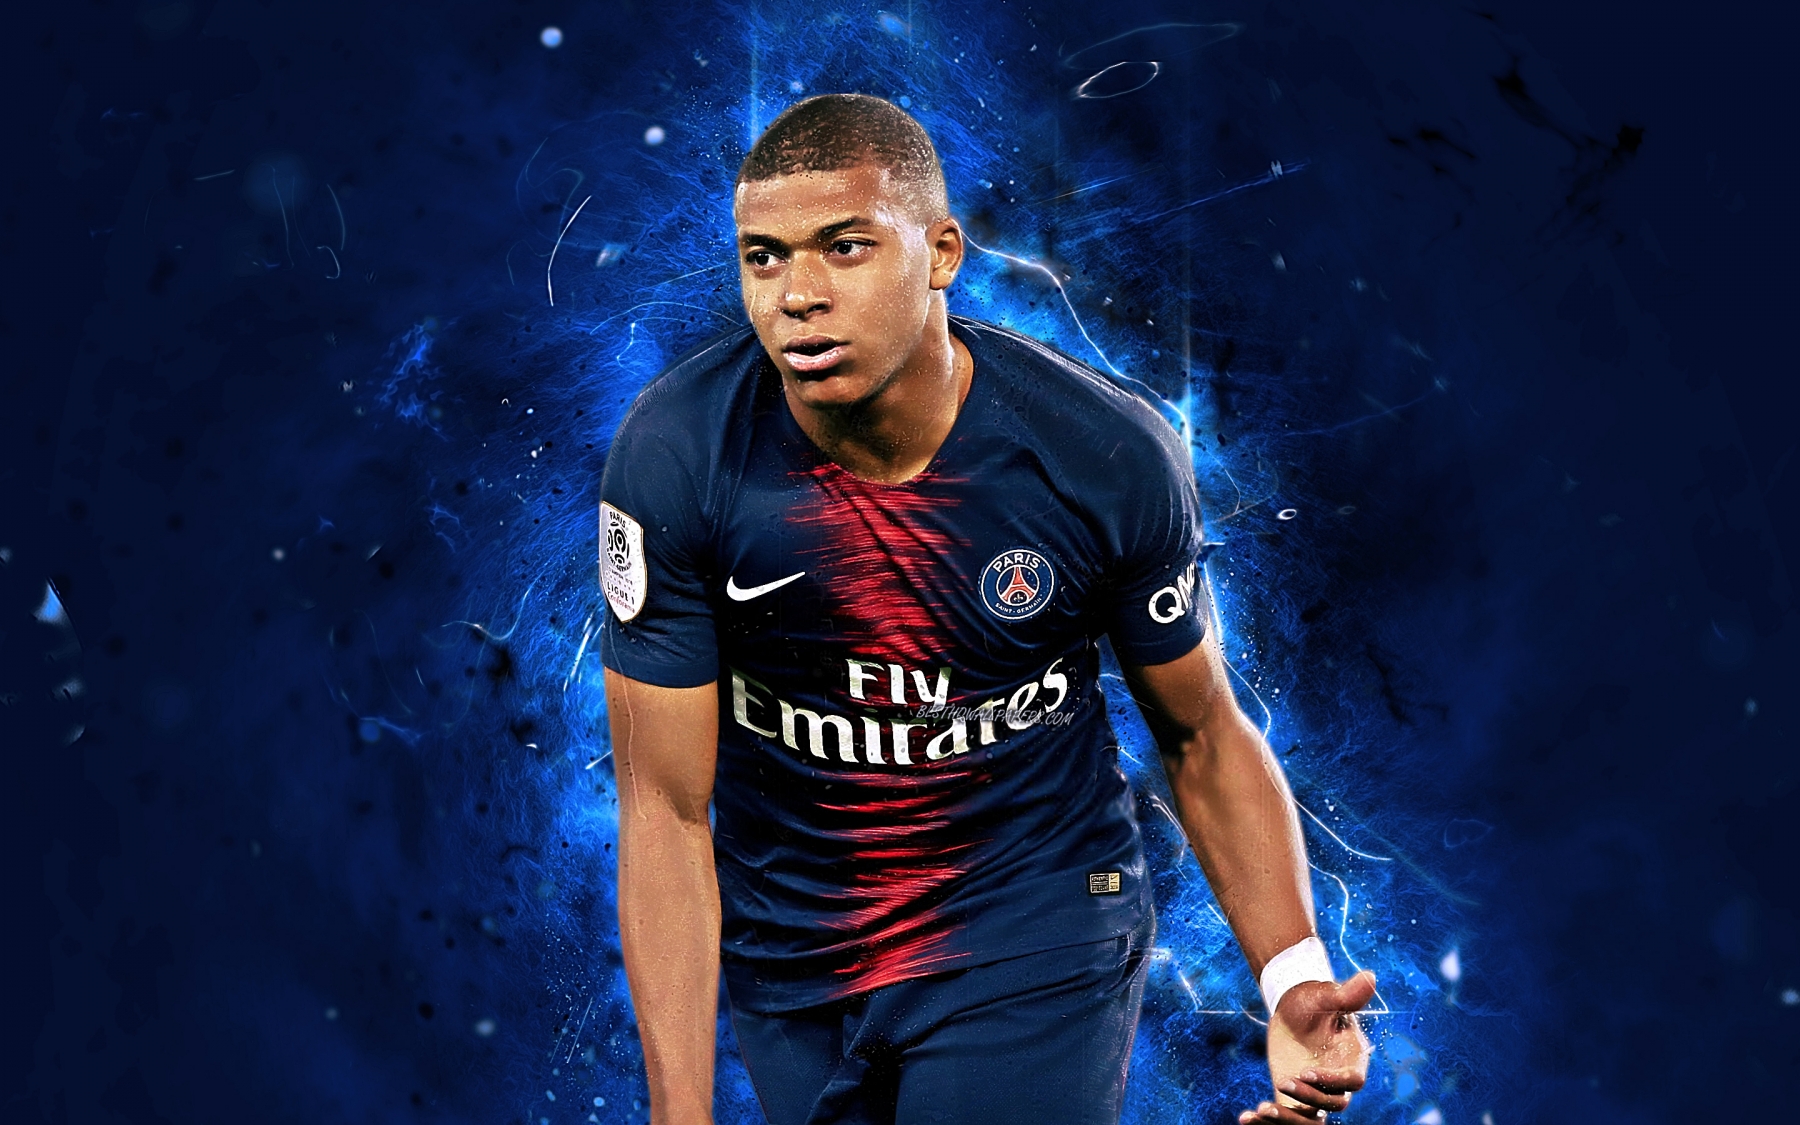 Kylian Mbappé 2019 France Wallpapers and Background Images - YL Computing